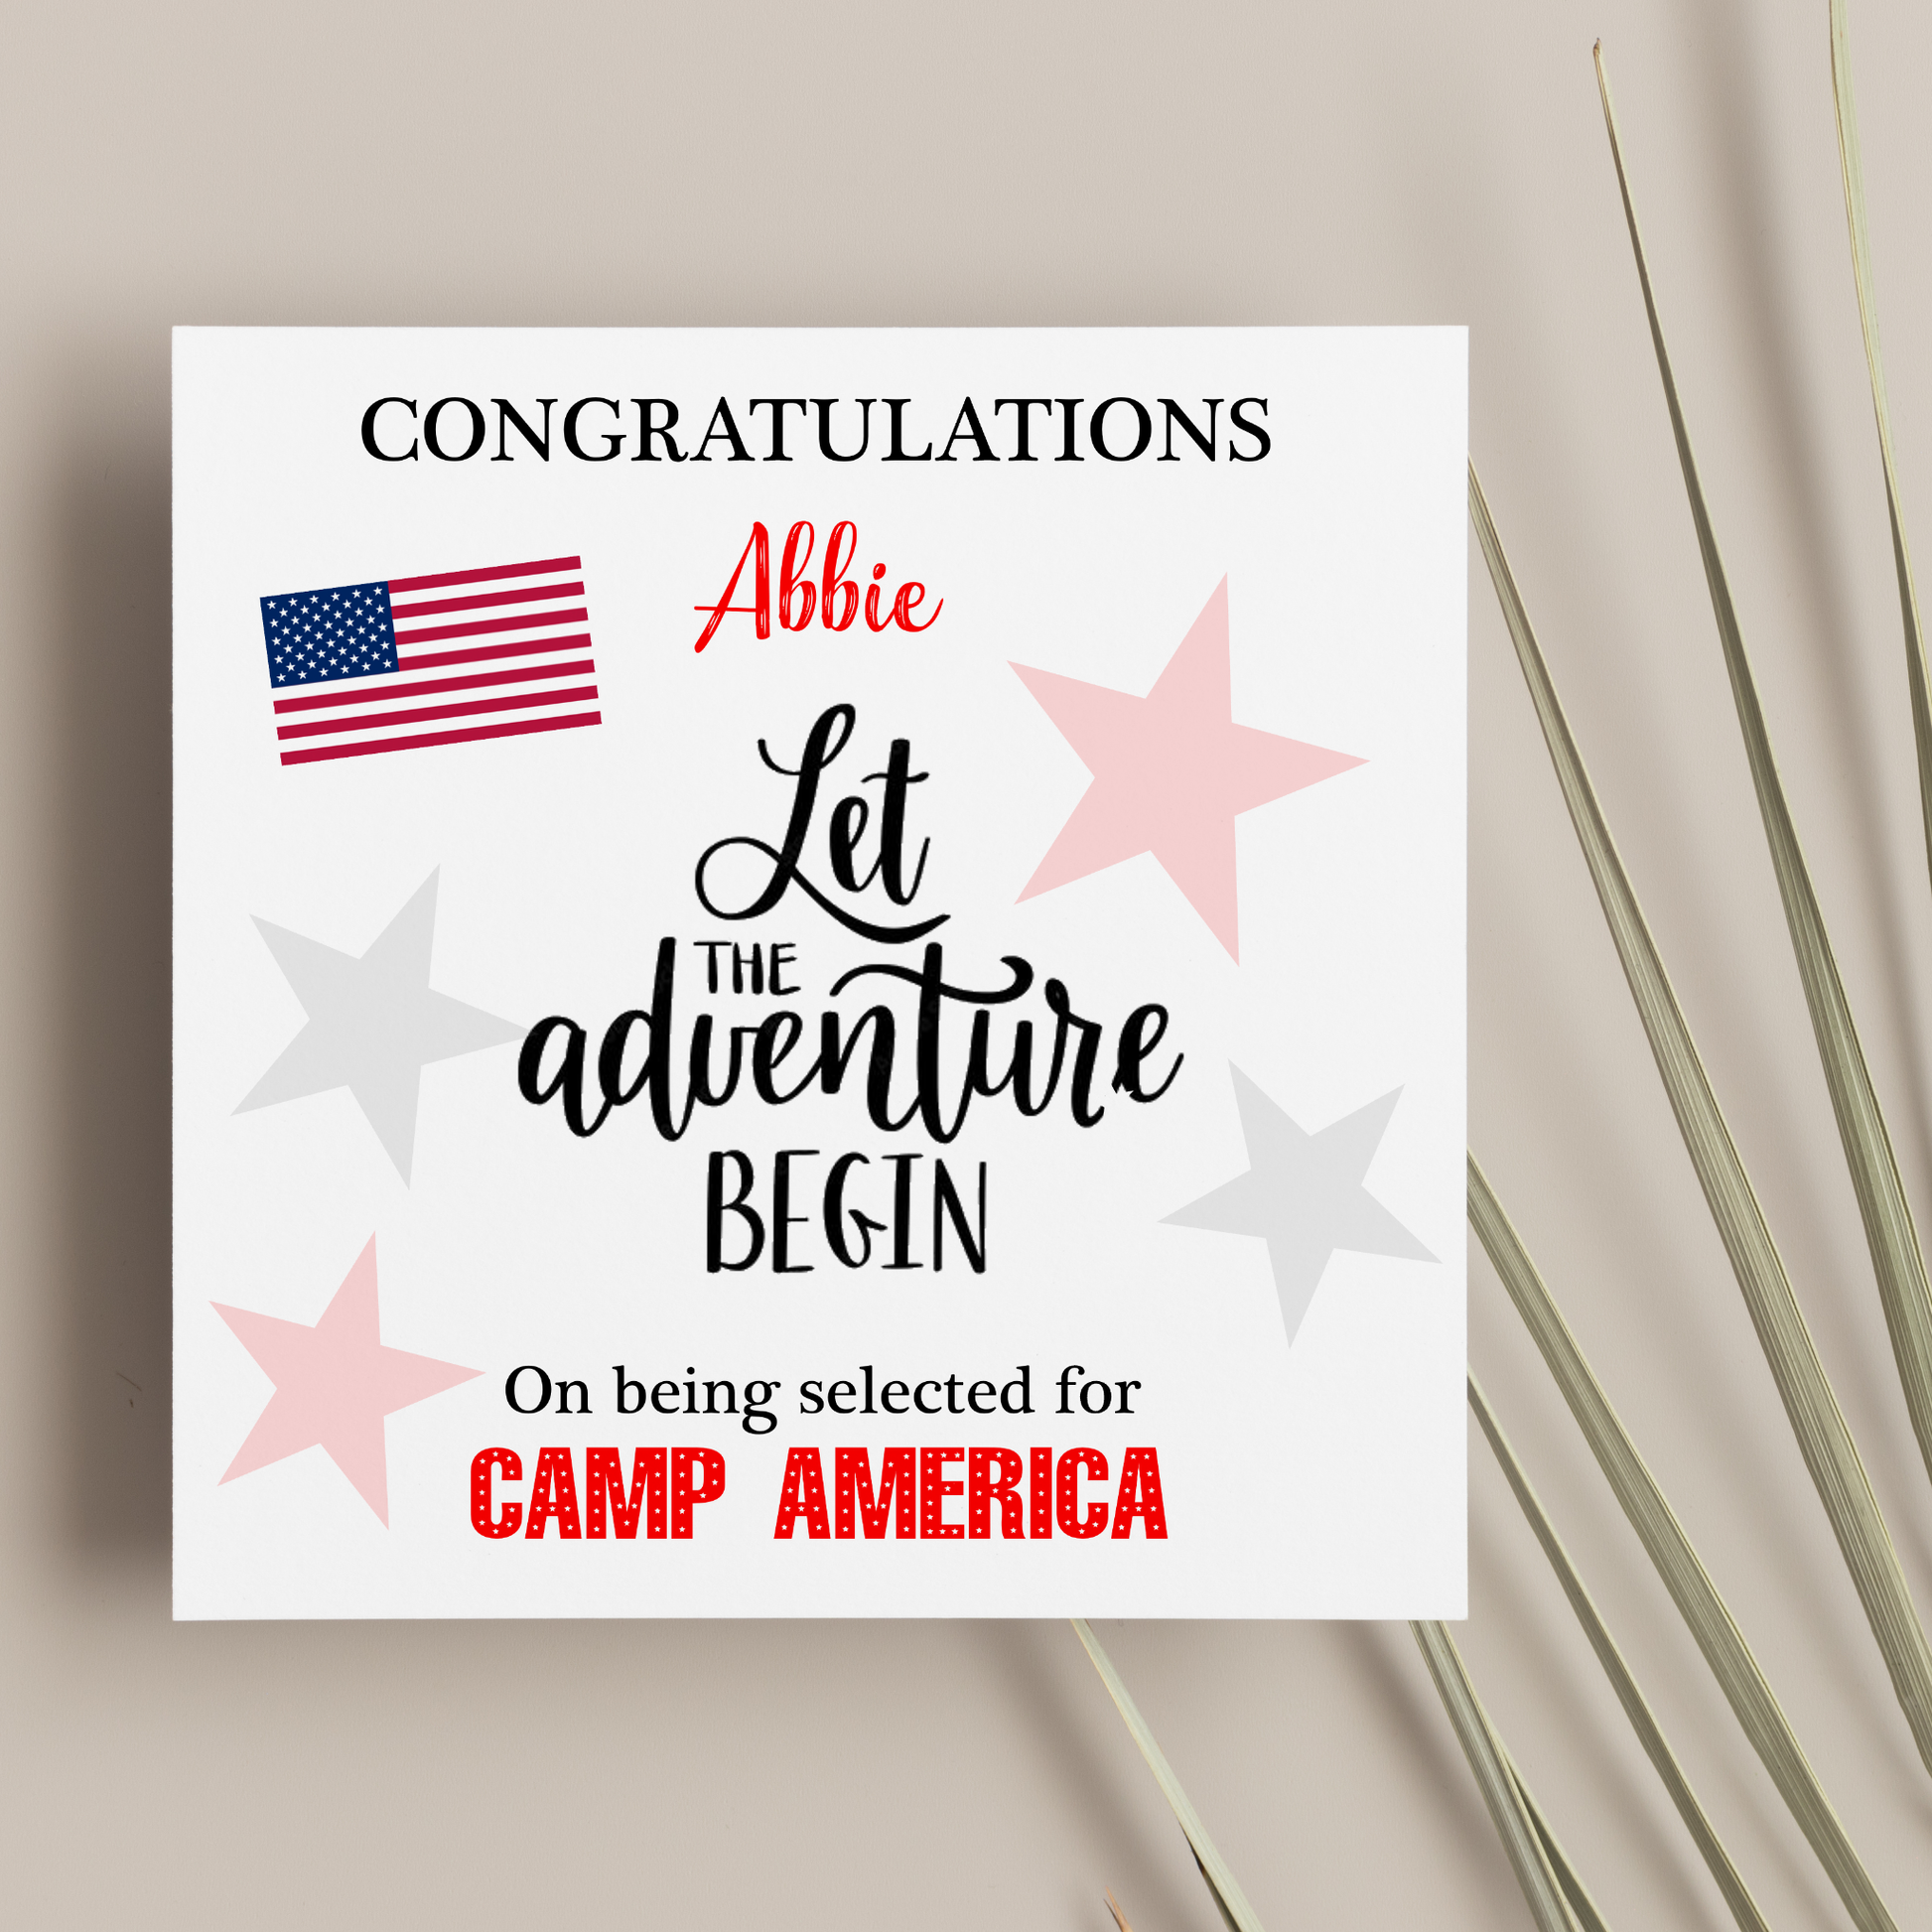 a sign that says congratulations to the adventure begin on being selected for camp america